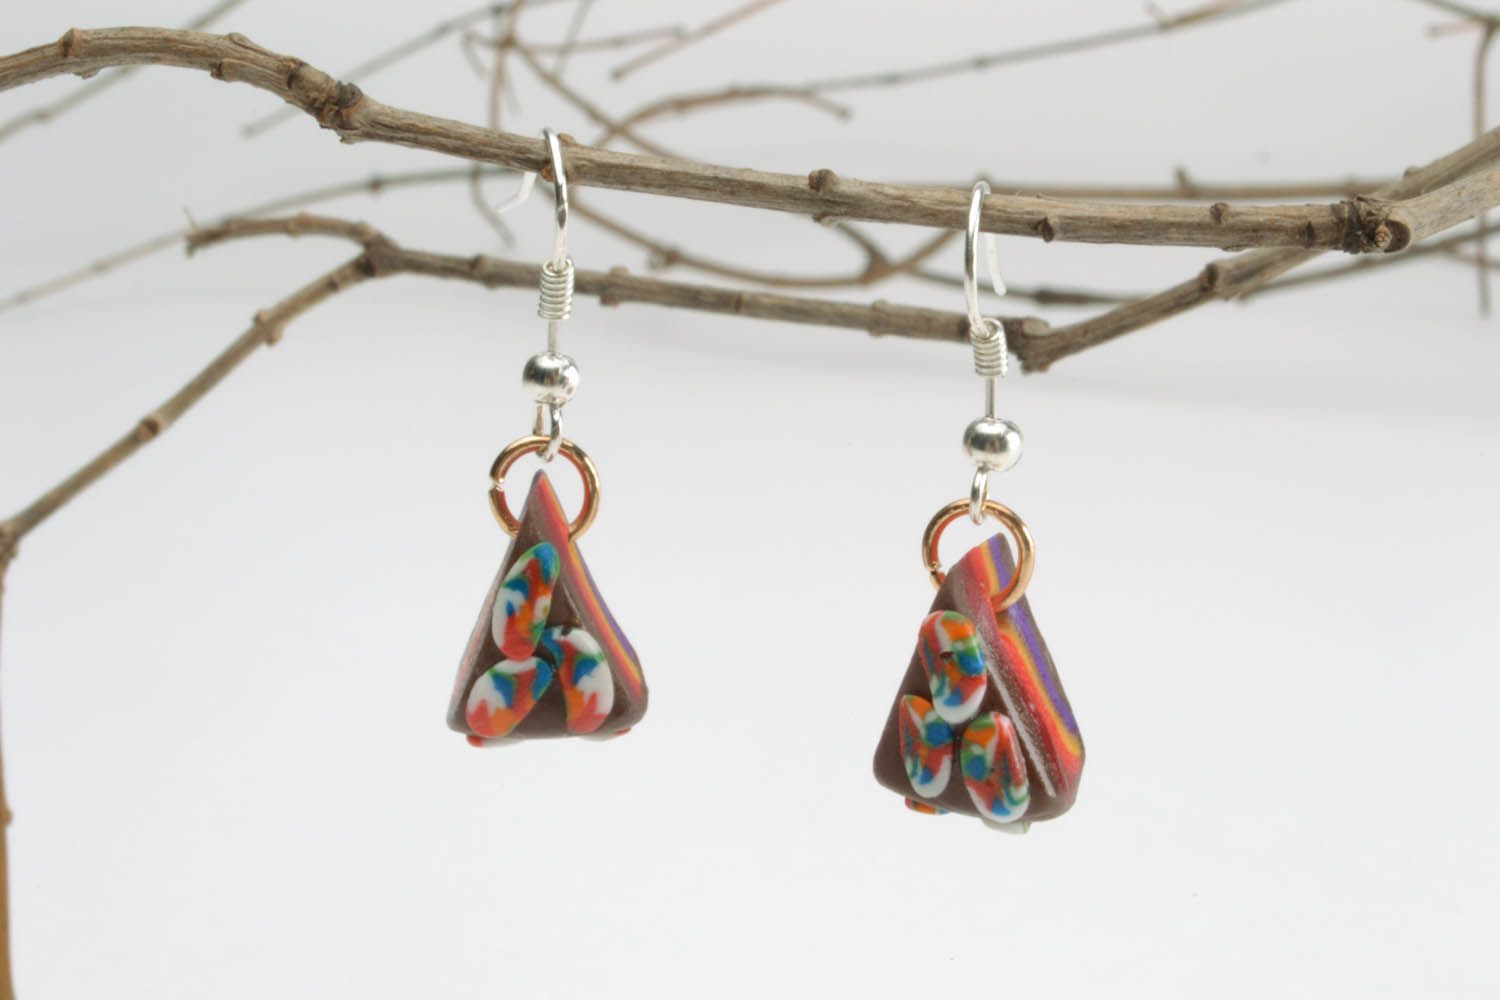 Cake-shaped earrings made of polymer clay photo 1